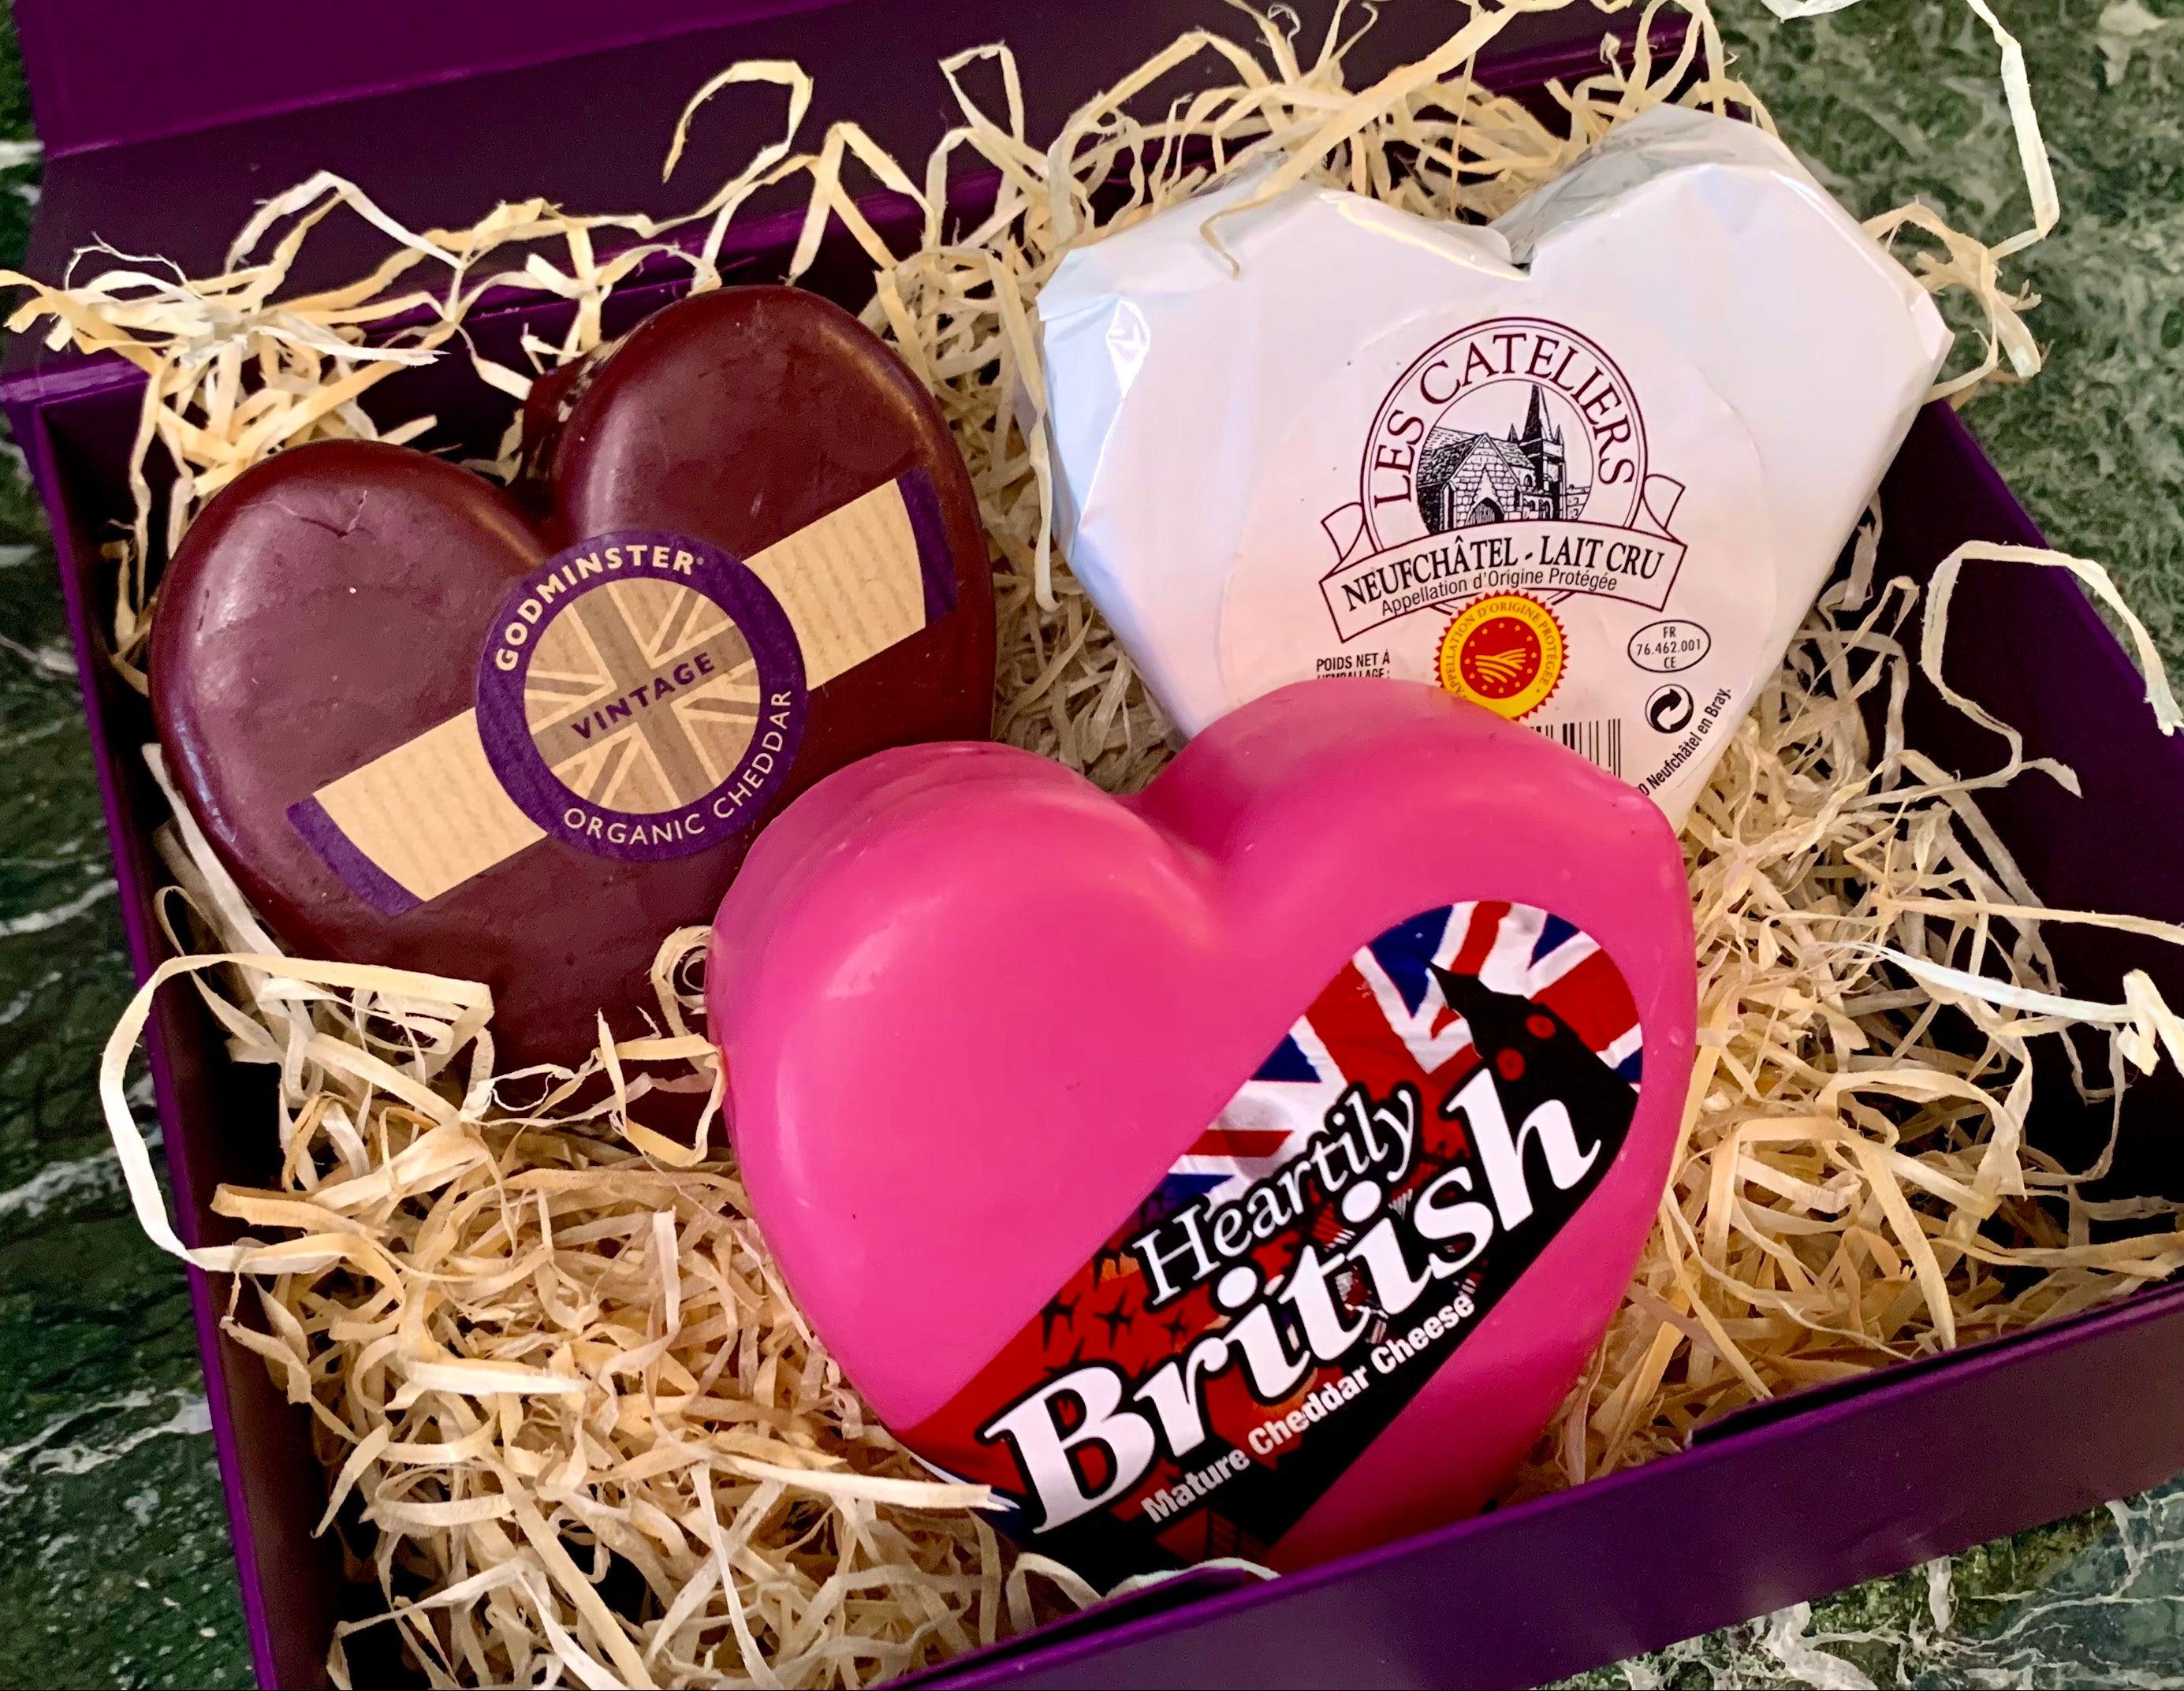 "The Three of Hearts" Cheese Gift Box 600g (cheese weight) - Celebration Cheeses